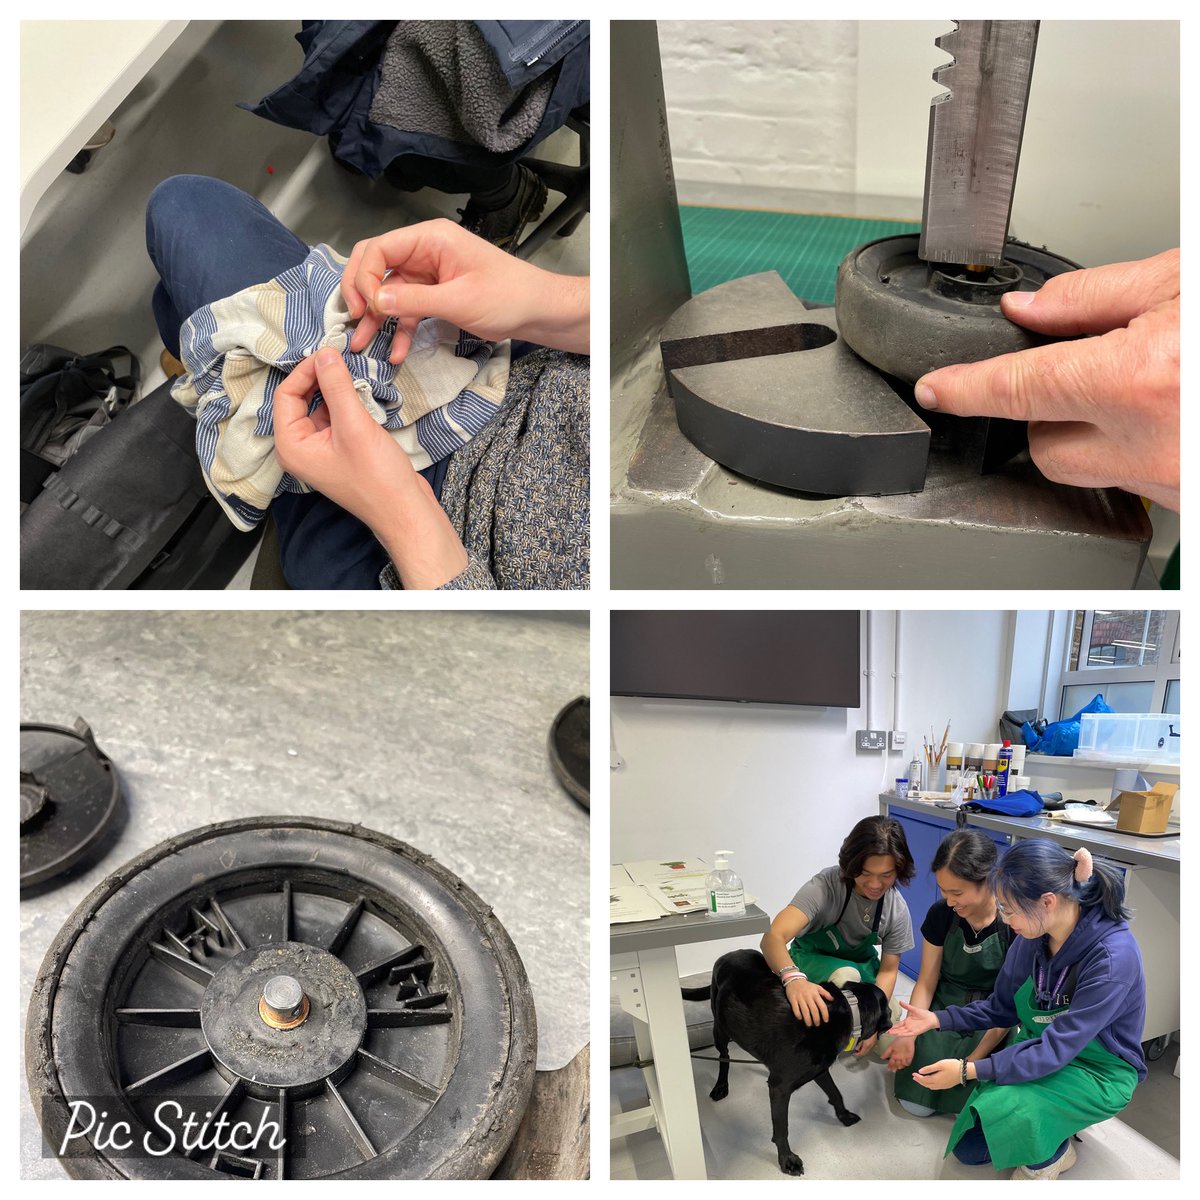 A fun day at @bloomsburyfest #RepairCafe fixing sentimental colanders, wobbly wheels, flickering screens, squeaky brakes, clothes with holes & troublesome vacuums! Thanks for all the hard work @of_Making @RestartProject @UCLEngage @CycleConfident @UCLconservation @SladeSchool